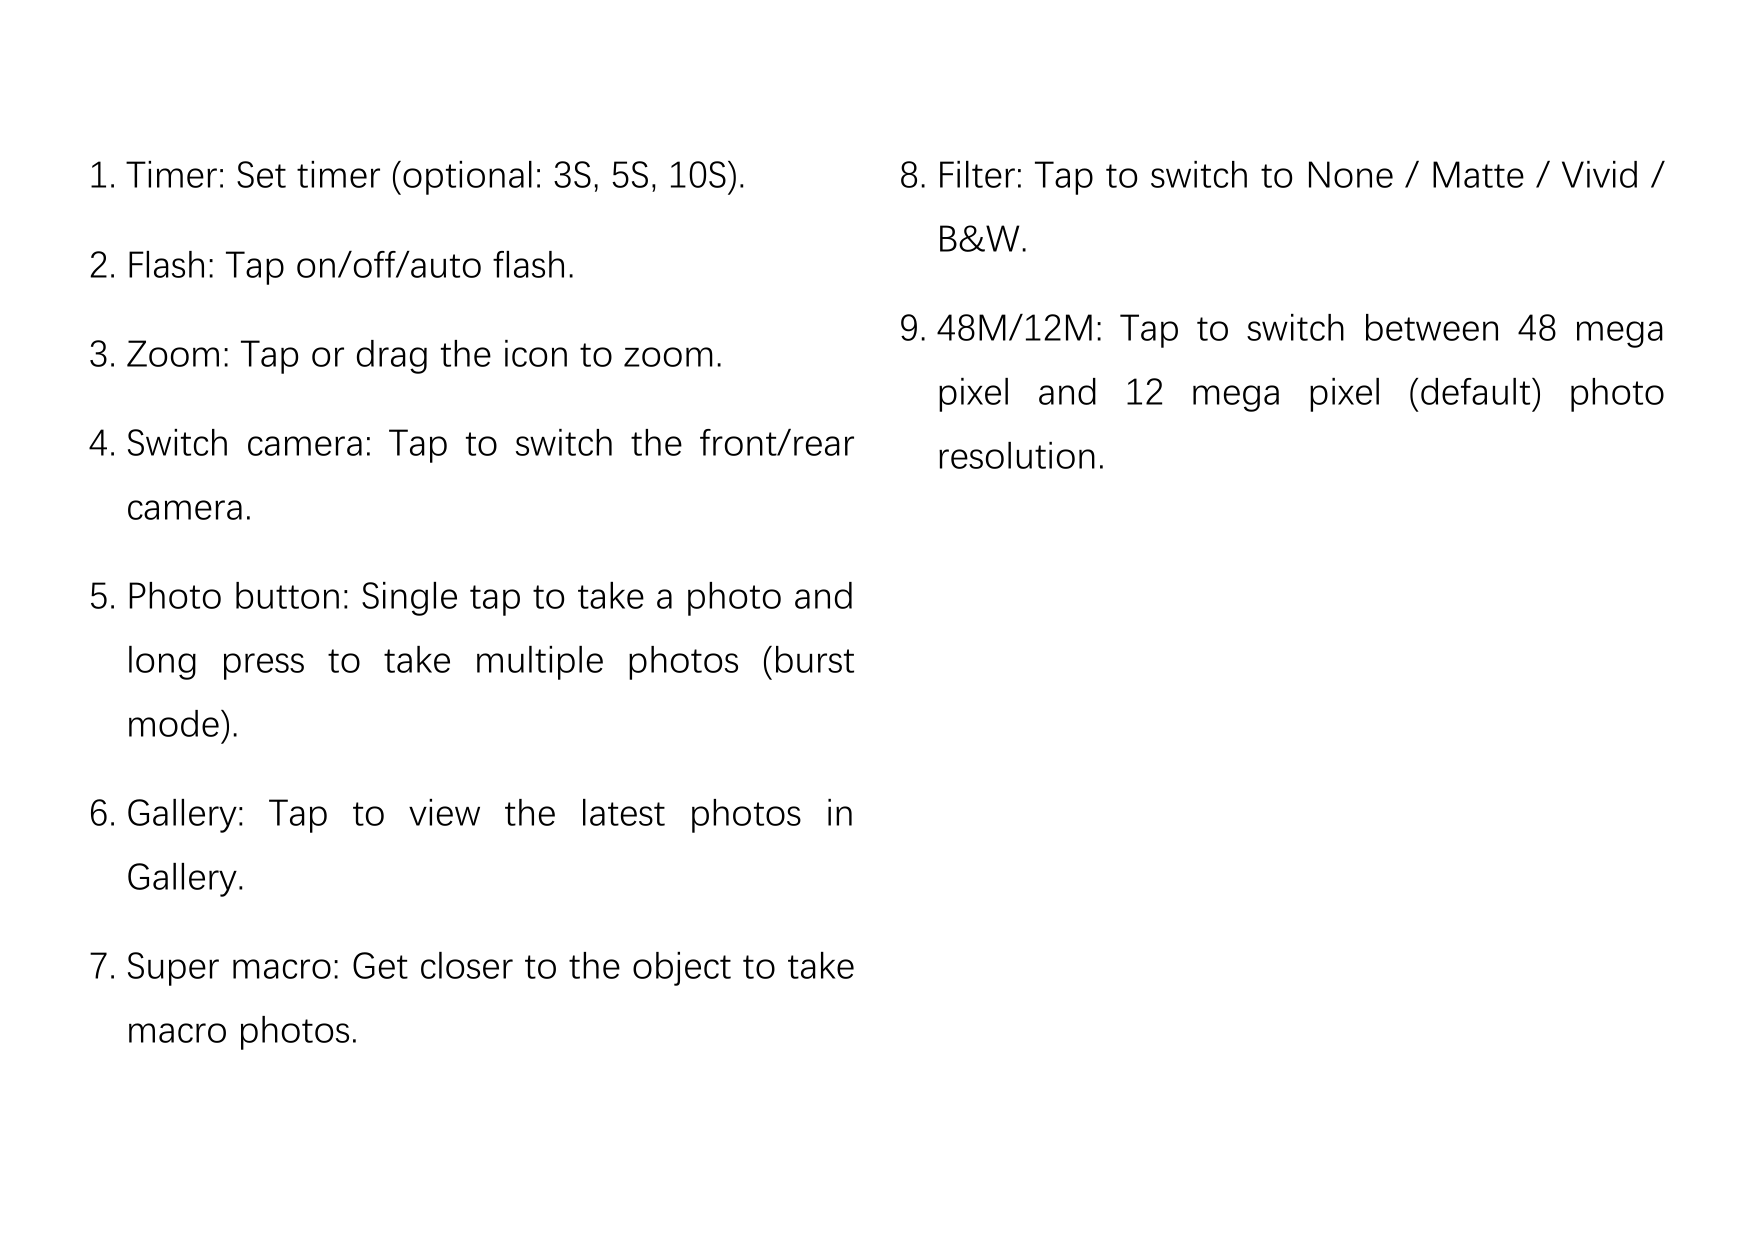 1. Timer: Set timer (optional: 3S, 5S, 10S).2. Flash: Tap on/off/auto flash.3. Zoom: Tap or drag the icon to zoom.4. Switch came